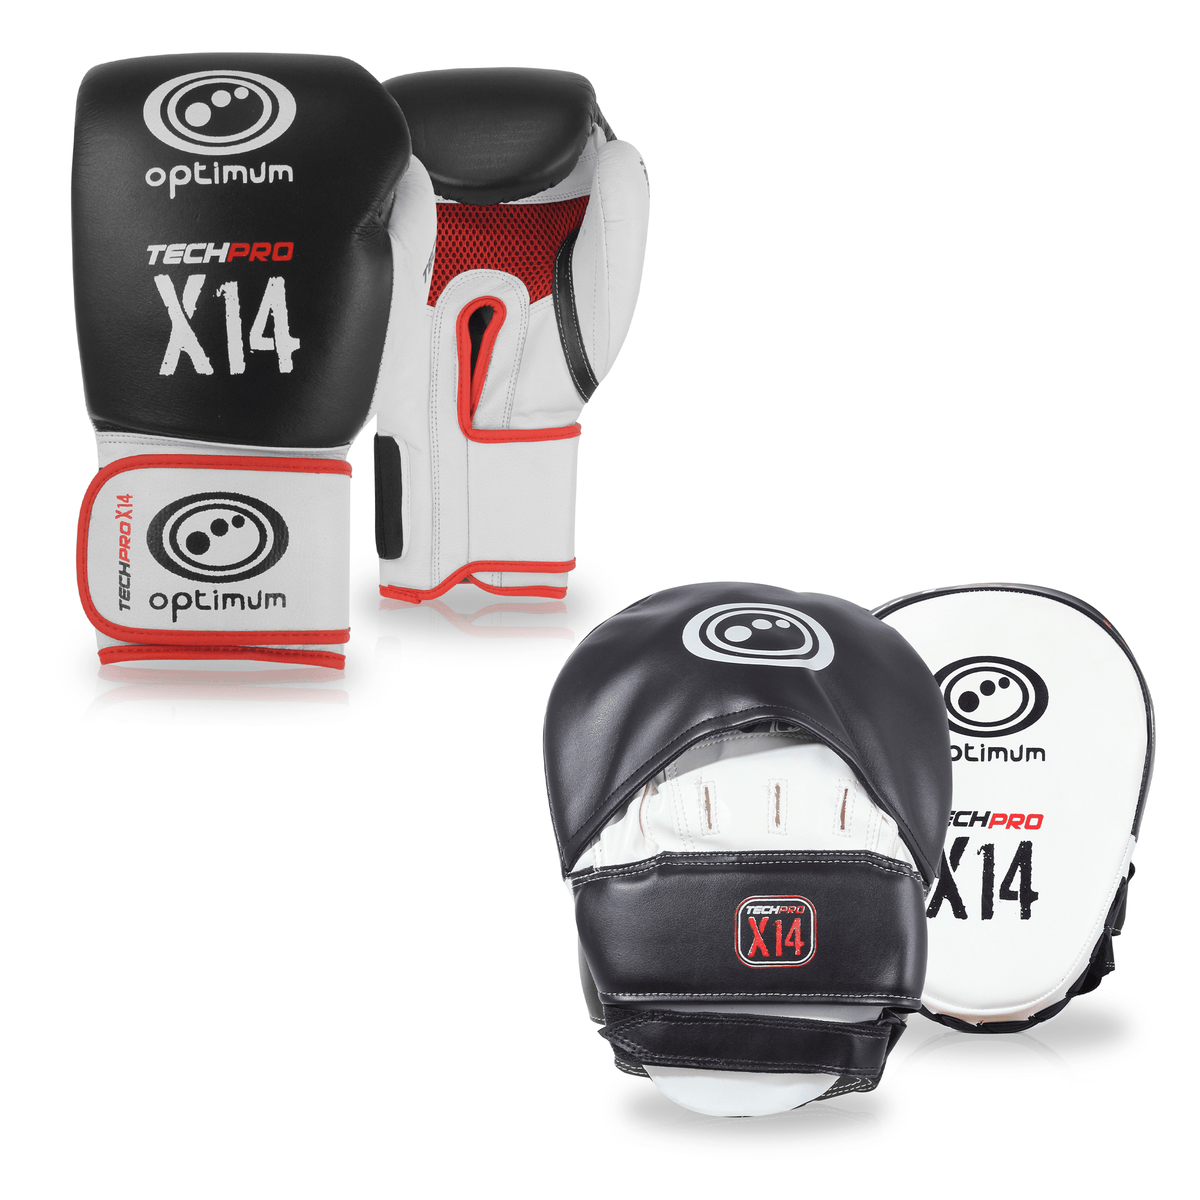 TechPro X14 Boxing Gloves with Hook and Jab Mitts - Optimum